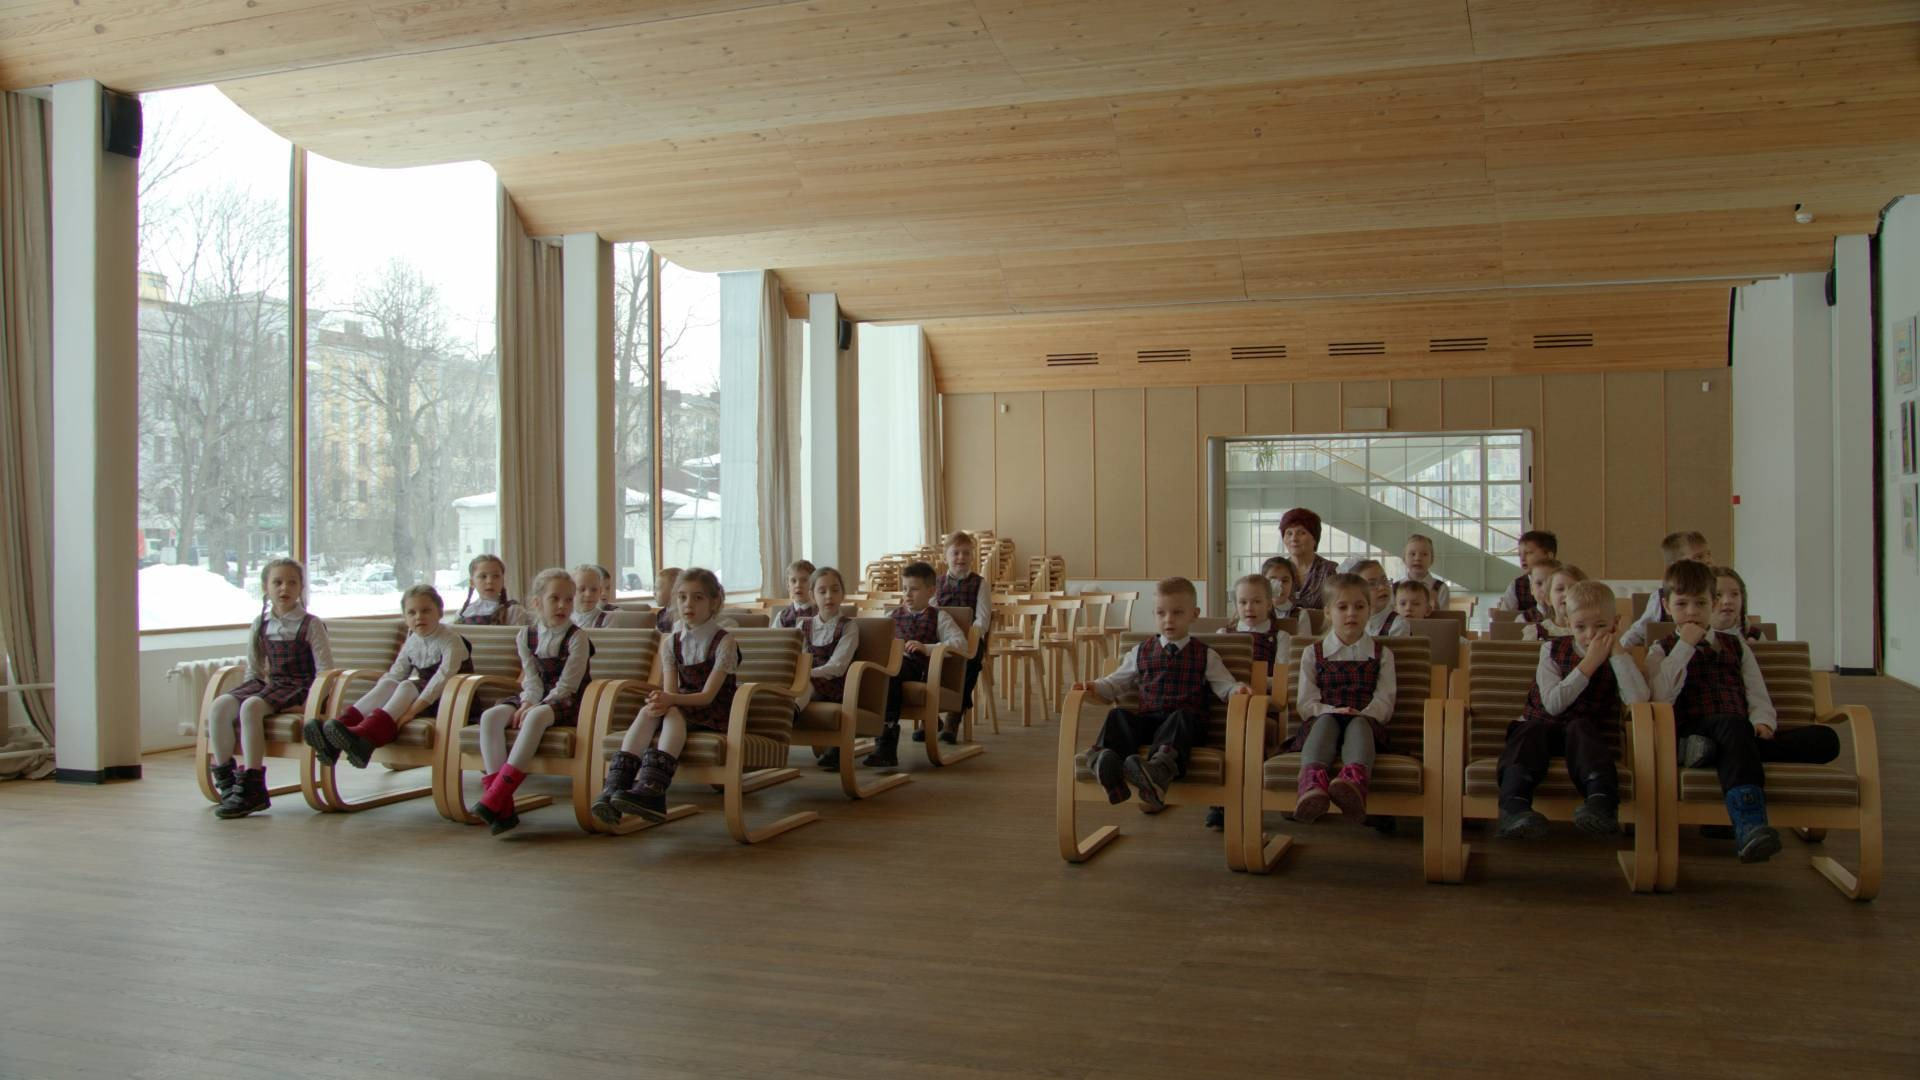 A photo of children sitting in a modernist library